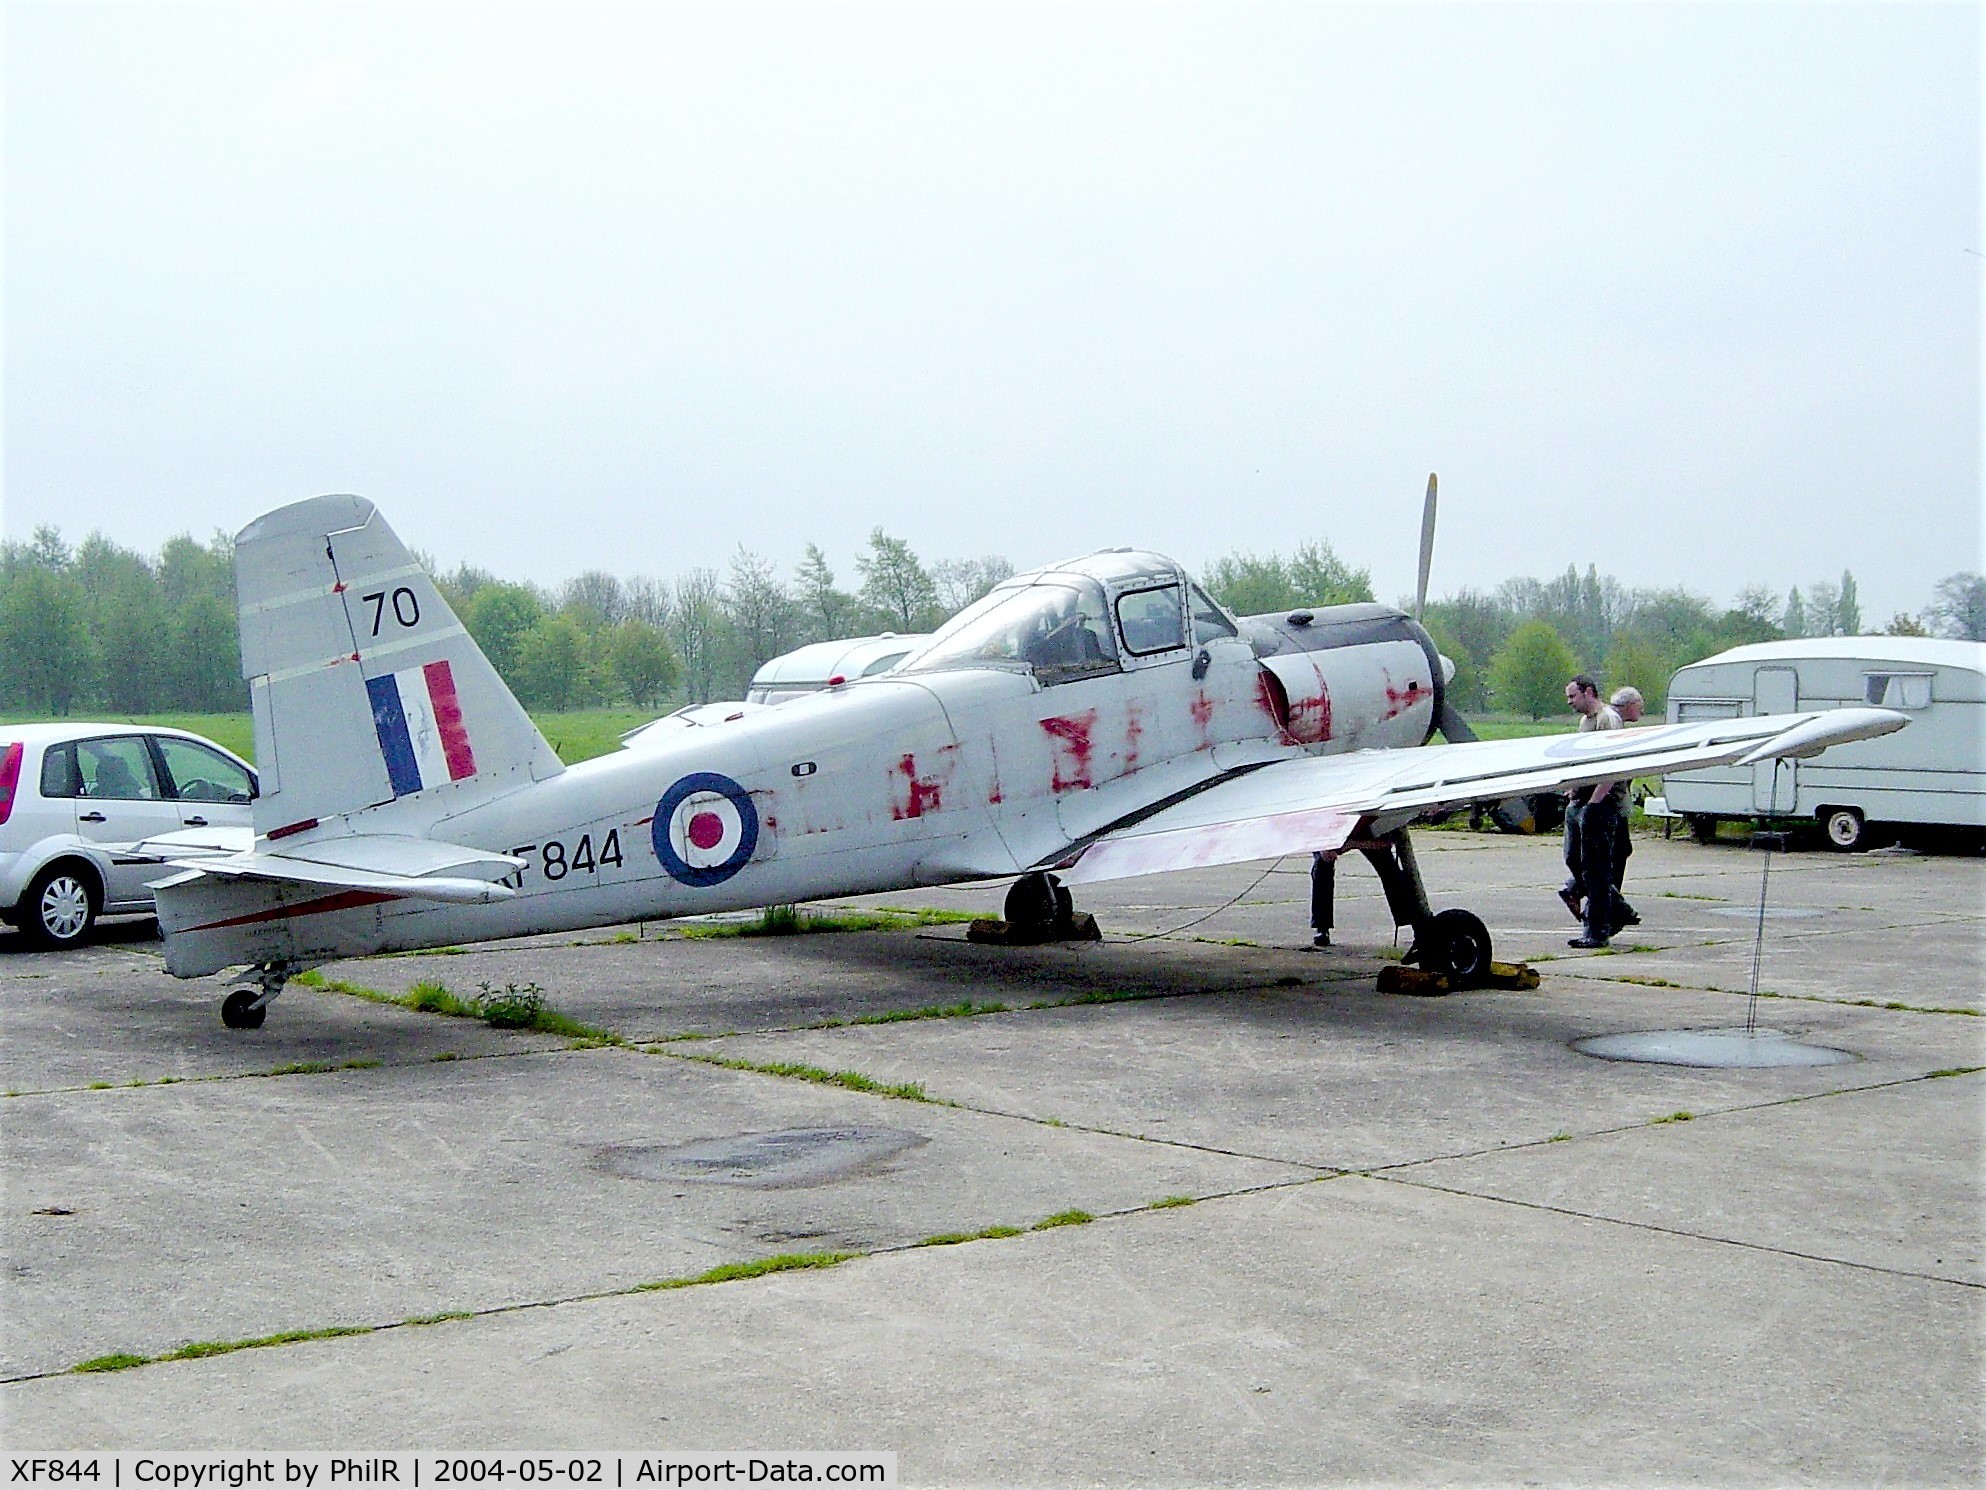 XF844, Percival P-56 Provost T.1 C/N PAC/56/349, On display at the May 2004 Bruntingthorpe Open Day, alas no more.